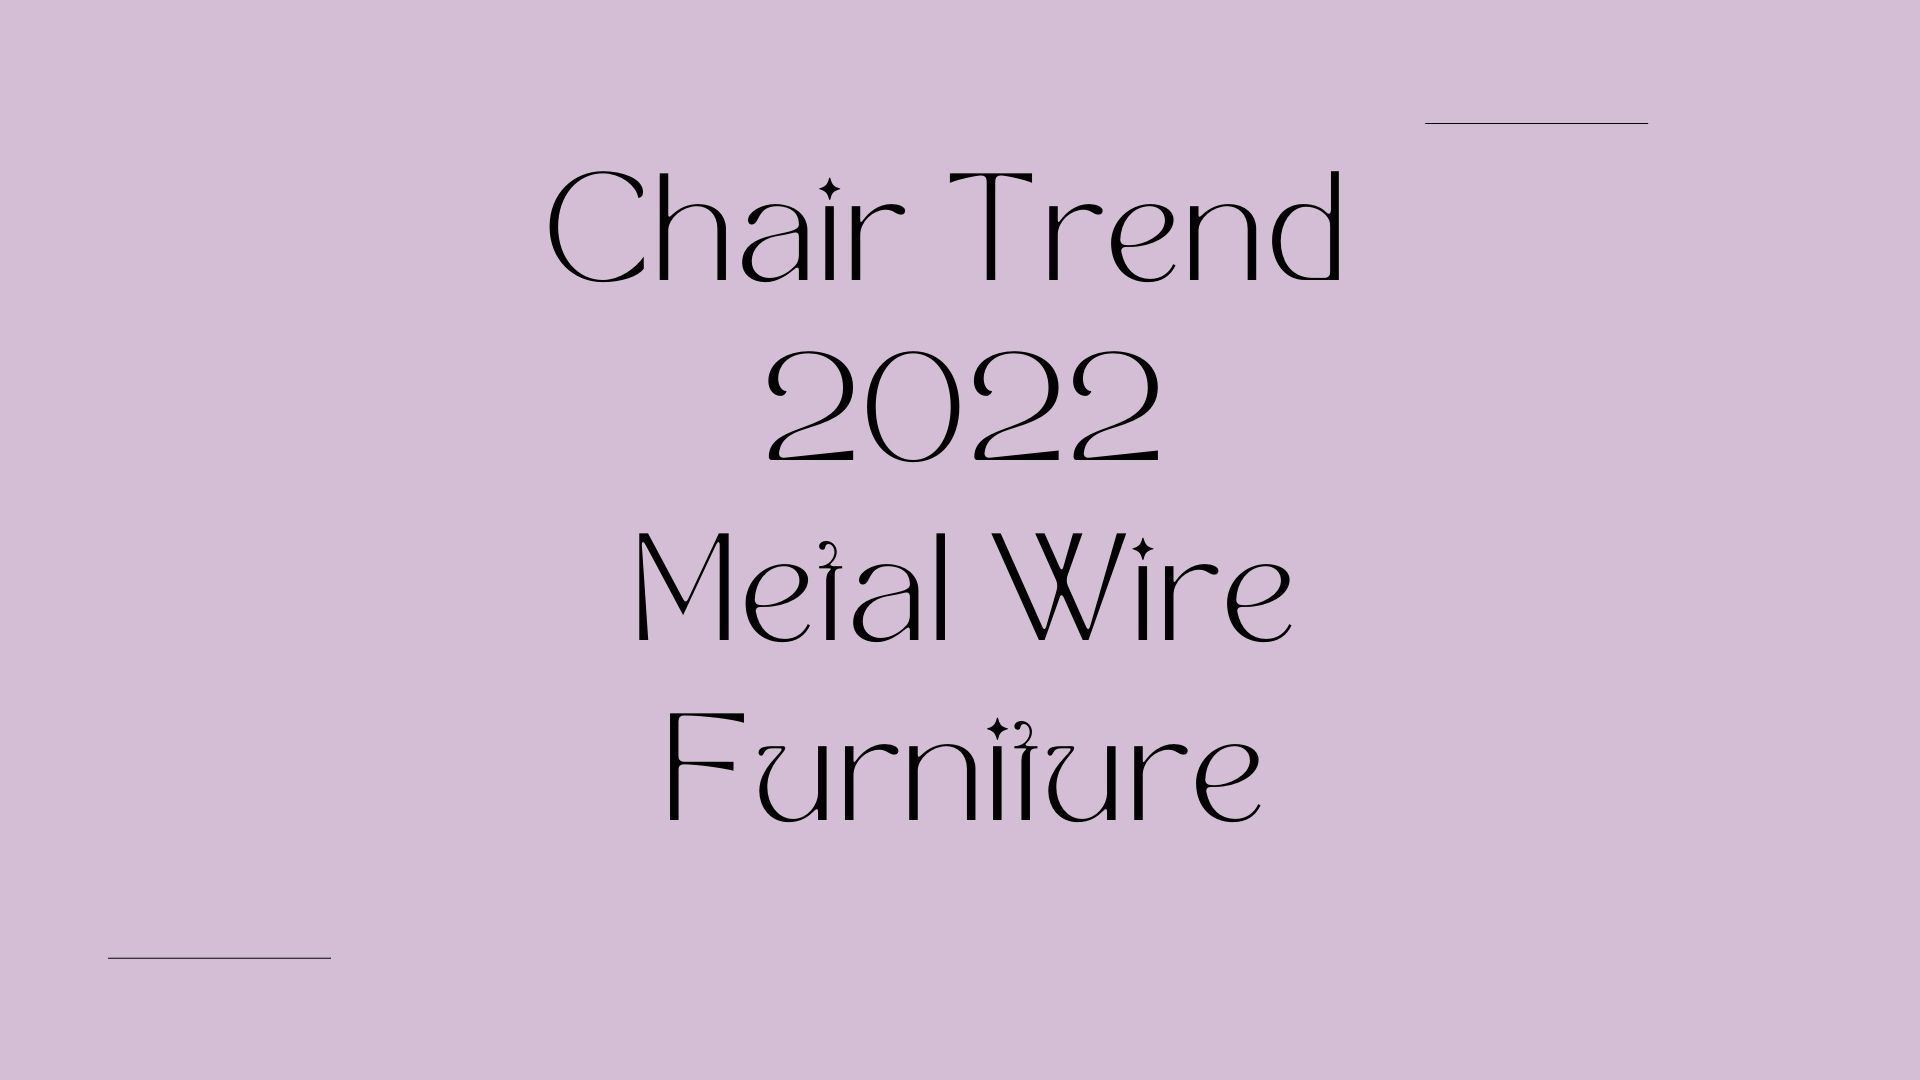 Chair Trend 2022 Metal Wire Furniture